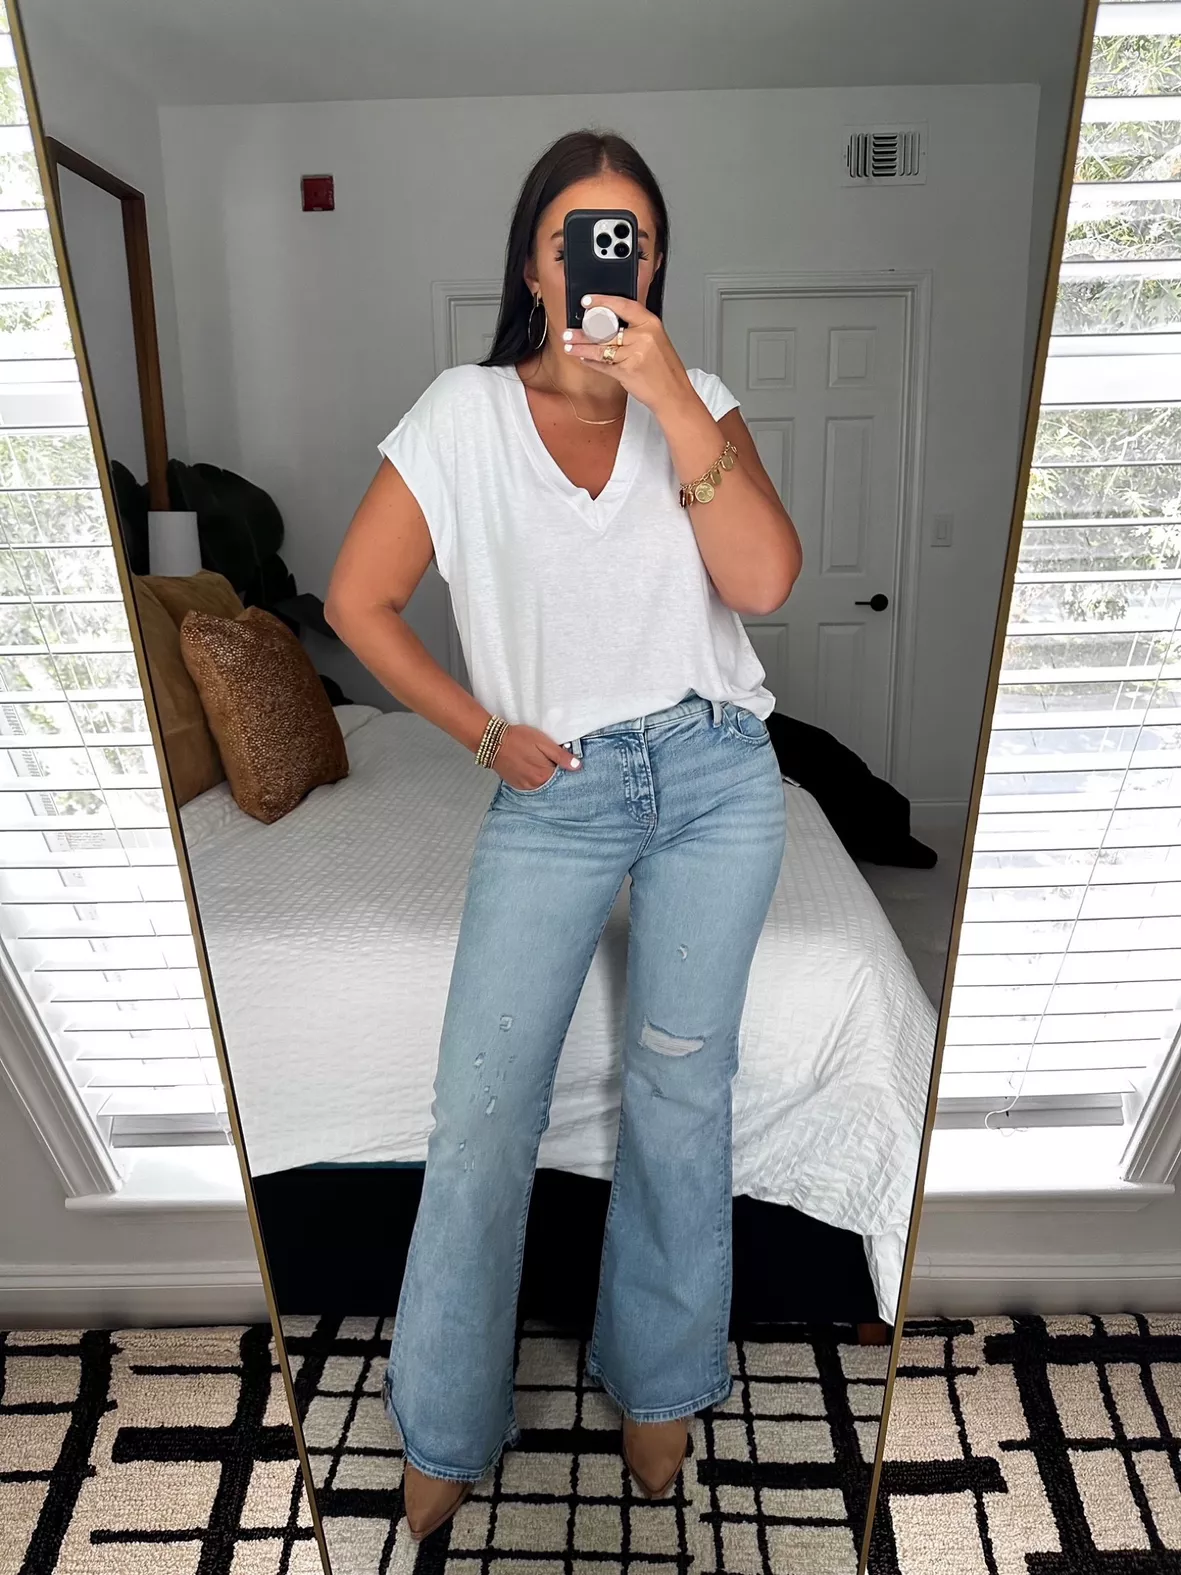 Mid Rise Light Wash '70s Flare Jeans